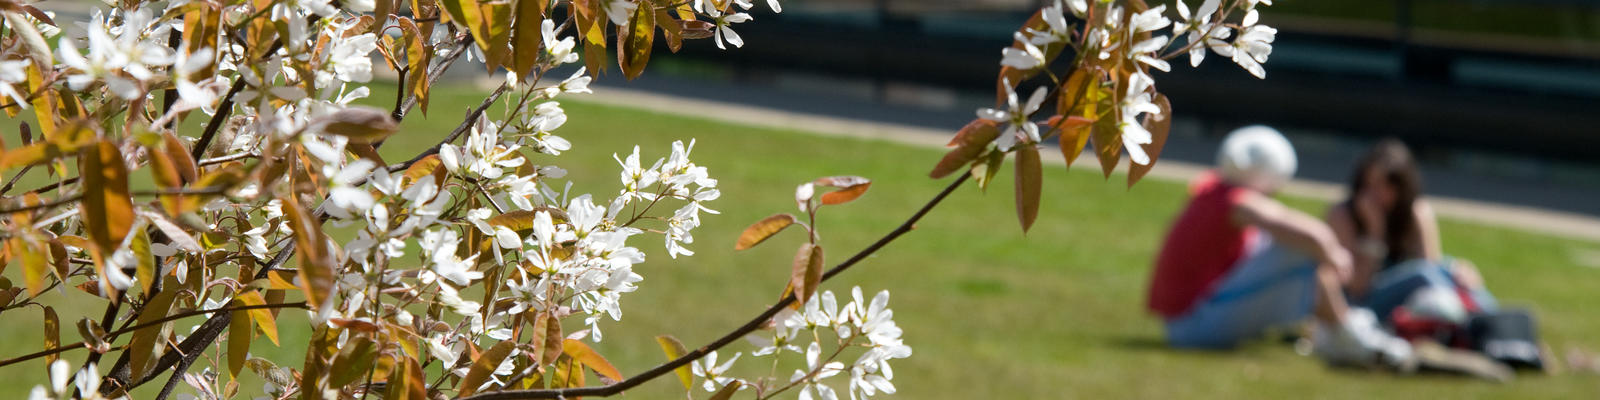 Shrub in flower in the foreground; behind, Students chatting on the grass.